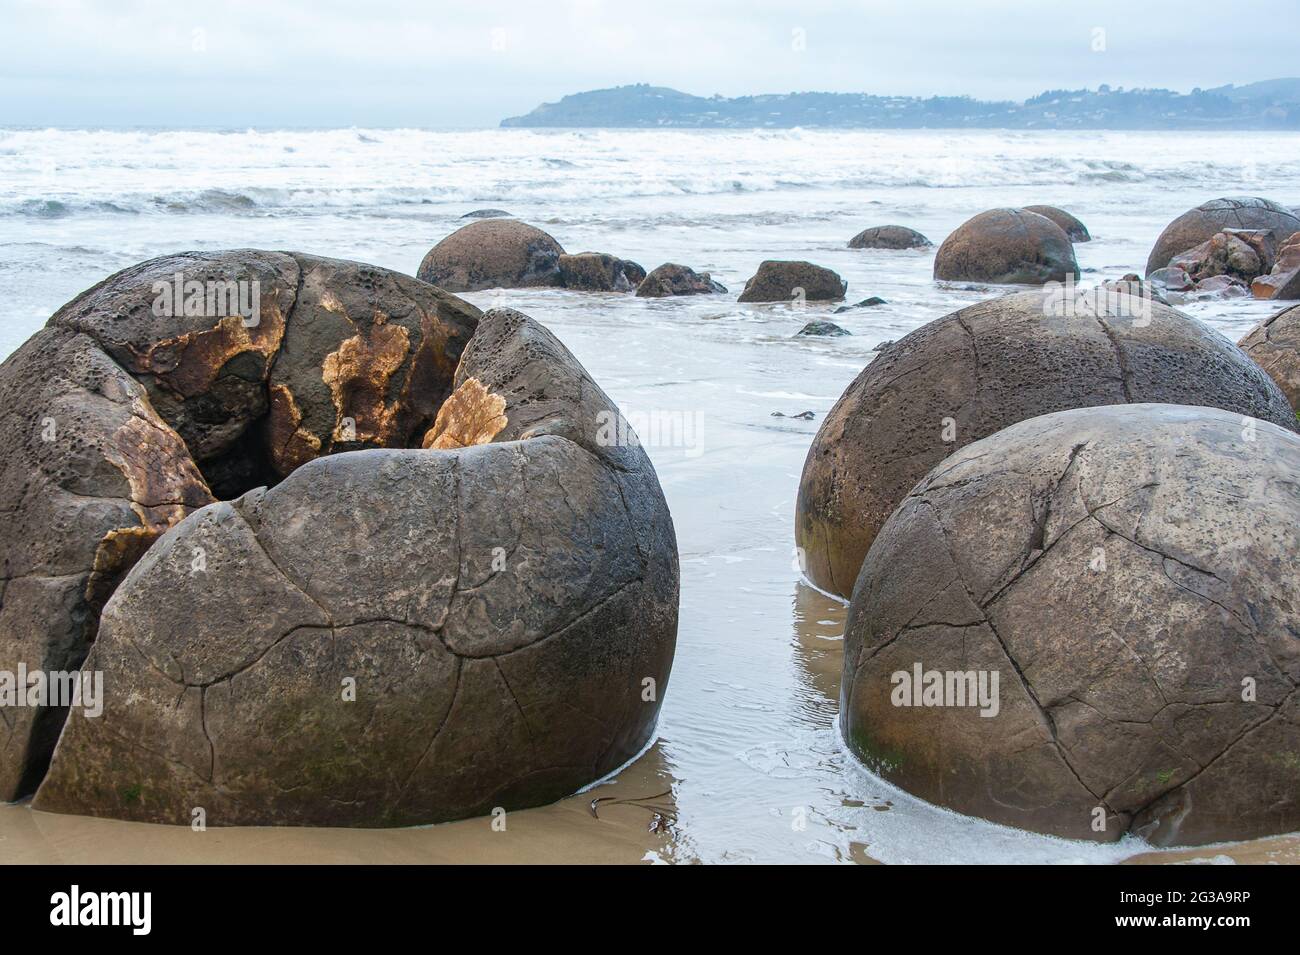 The Moeraki Boulders on Koekohe Beach, Otago. Close up view of a group of spherical rocks, with grey sea/sky background Stock Photo